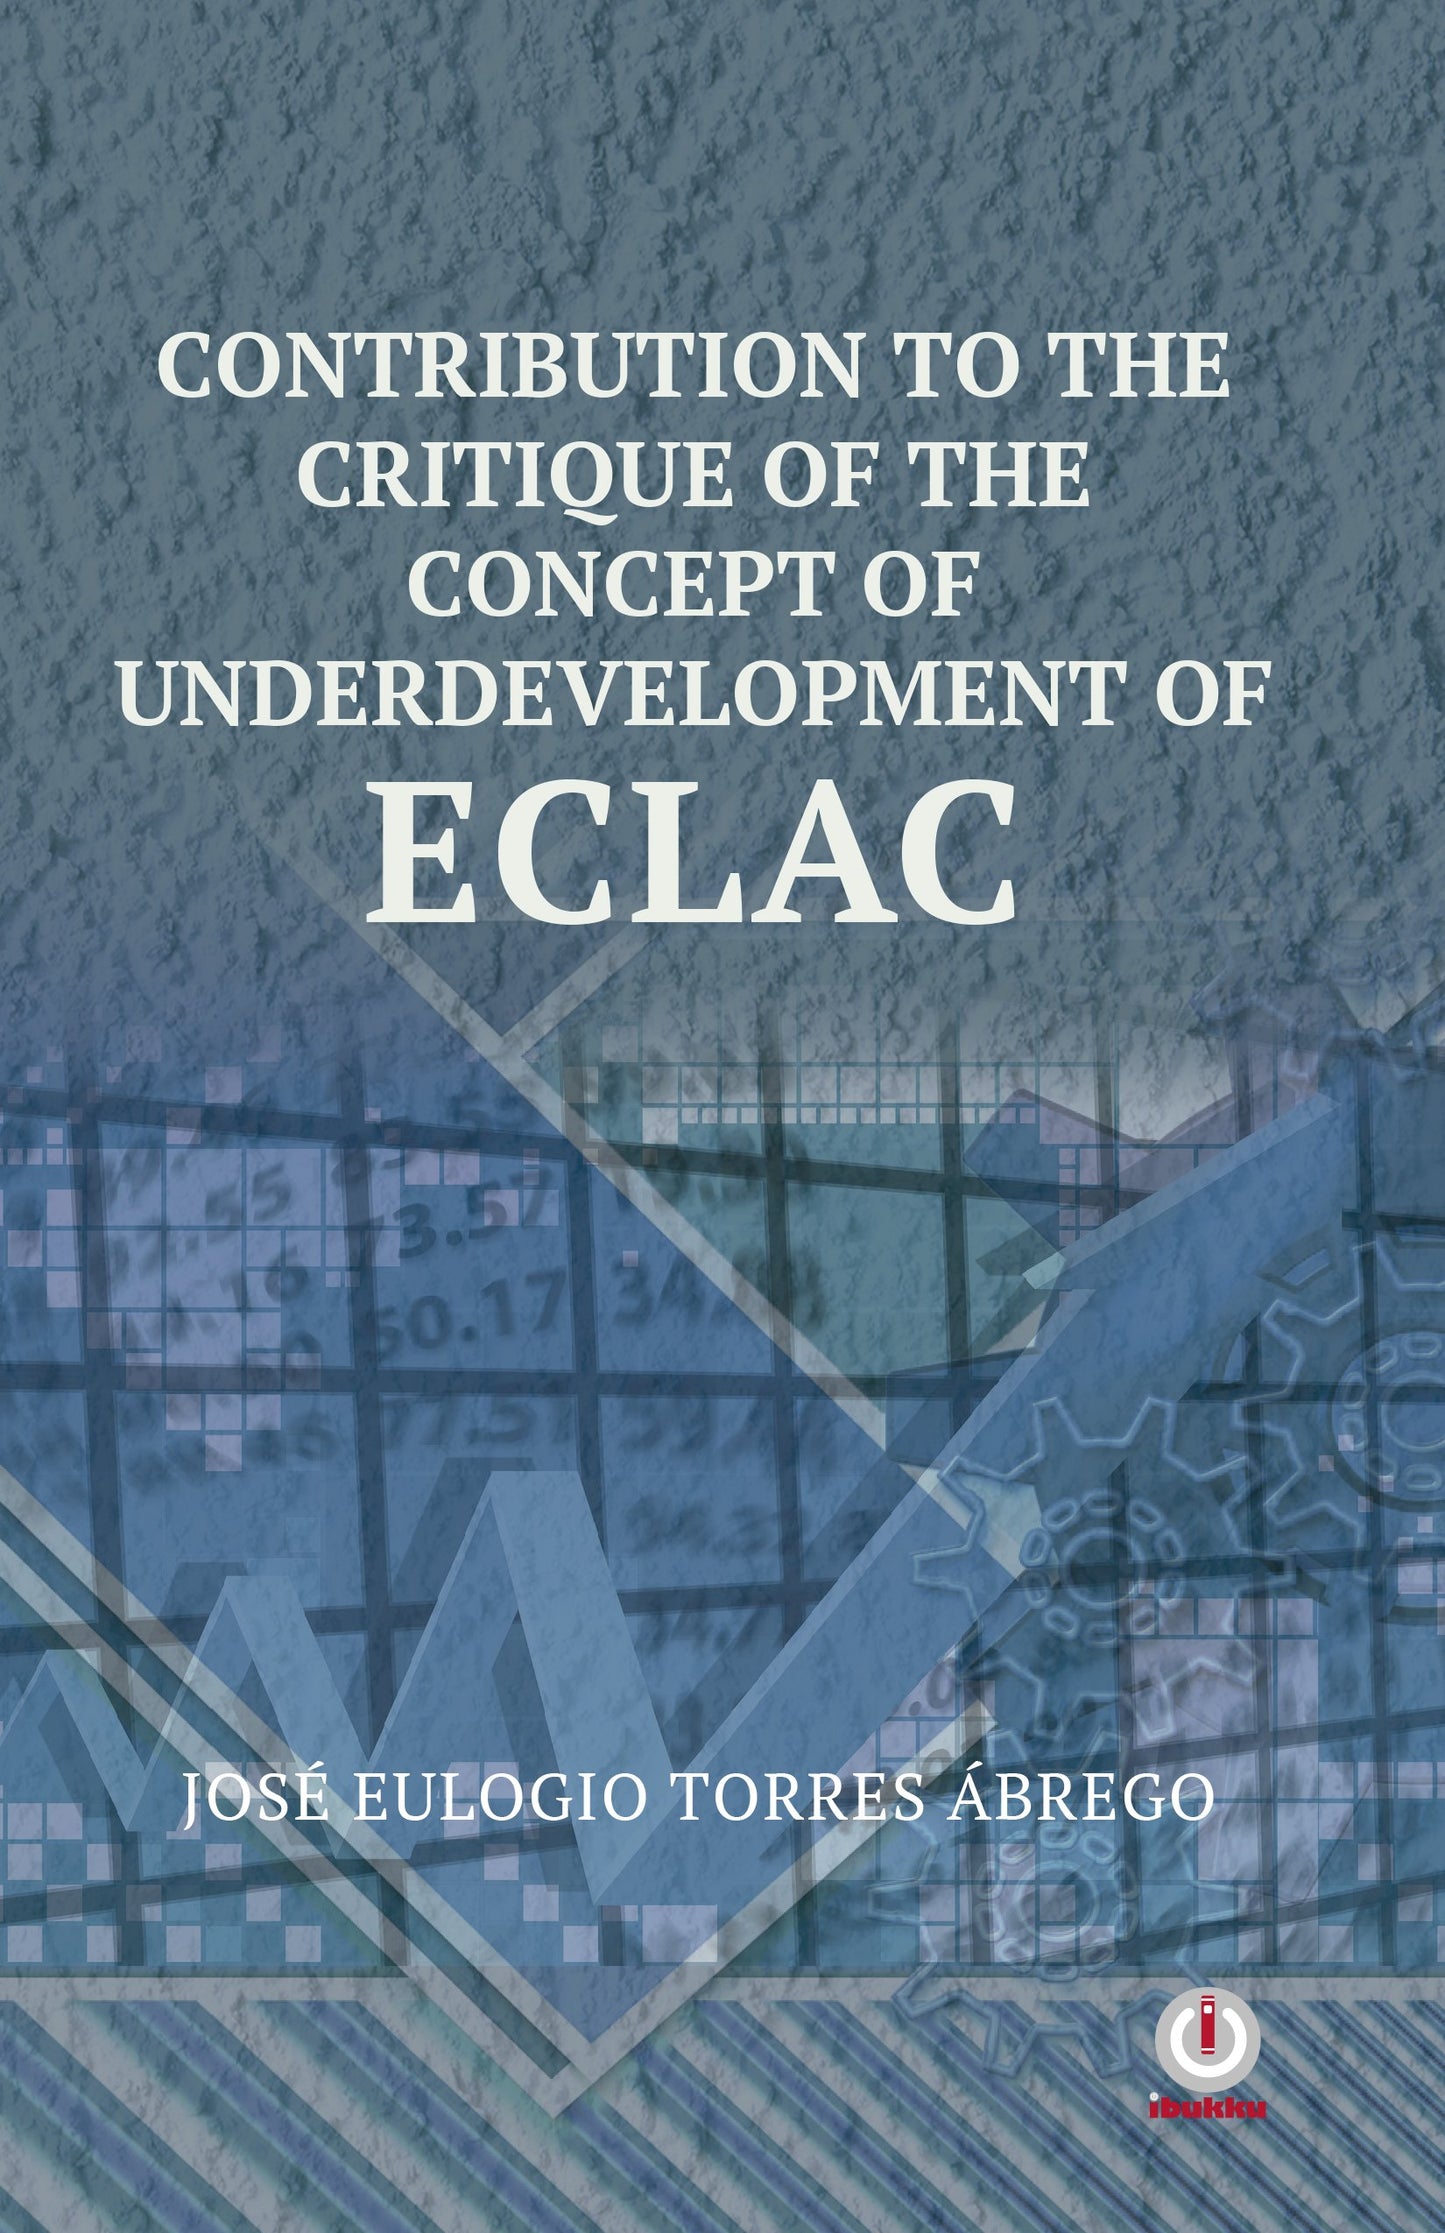 Contribution To The Critique Of The Concept Of Underdevelopment Of ECLAC (Impreso) - ibukku, LLC